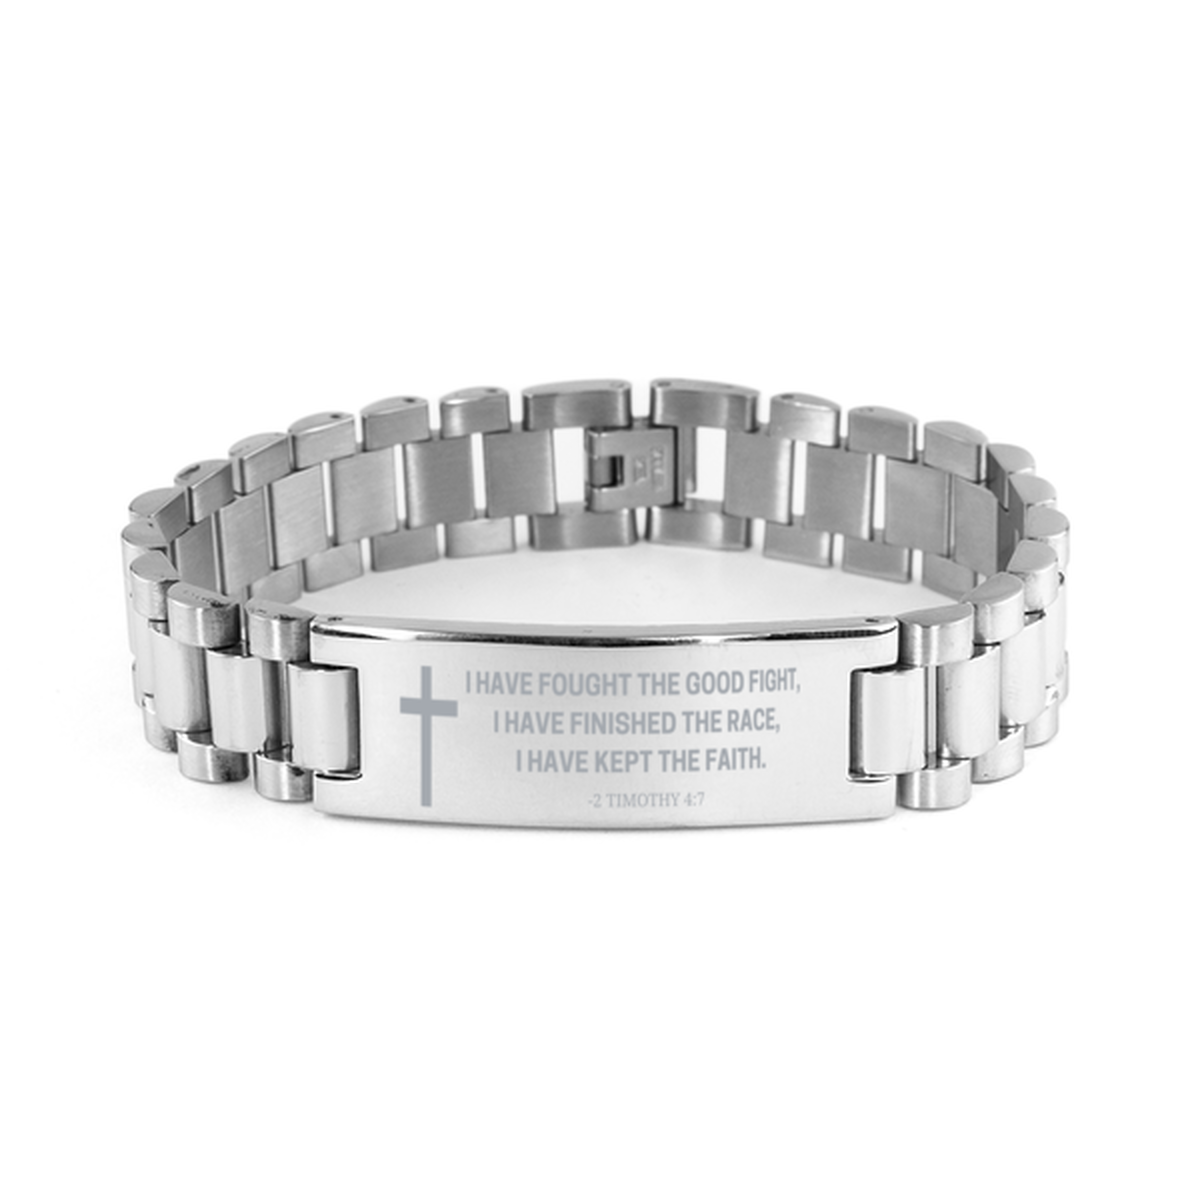 Baptism Gifts For Teenage Boys Girls, Christian Bible Verse Ladder Stainless Steel Bracelet, I have fought the good fight, Catholic Confirmation Gifts for Son, Godson, Grandson, Nephew